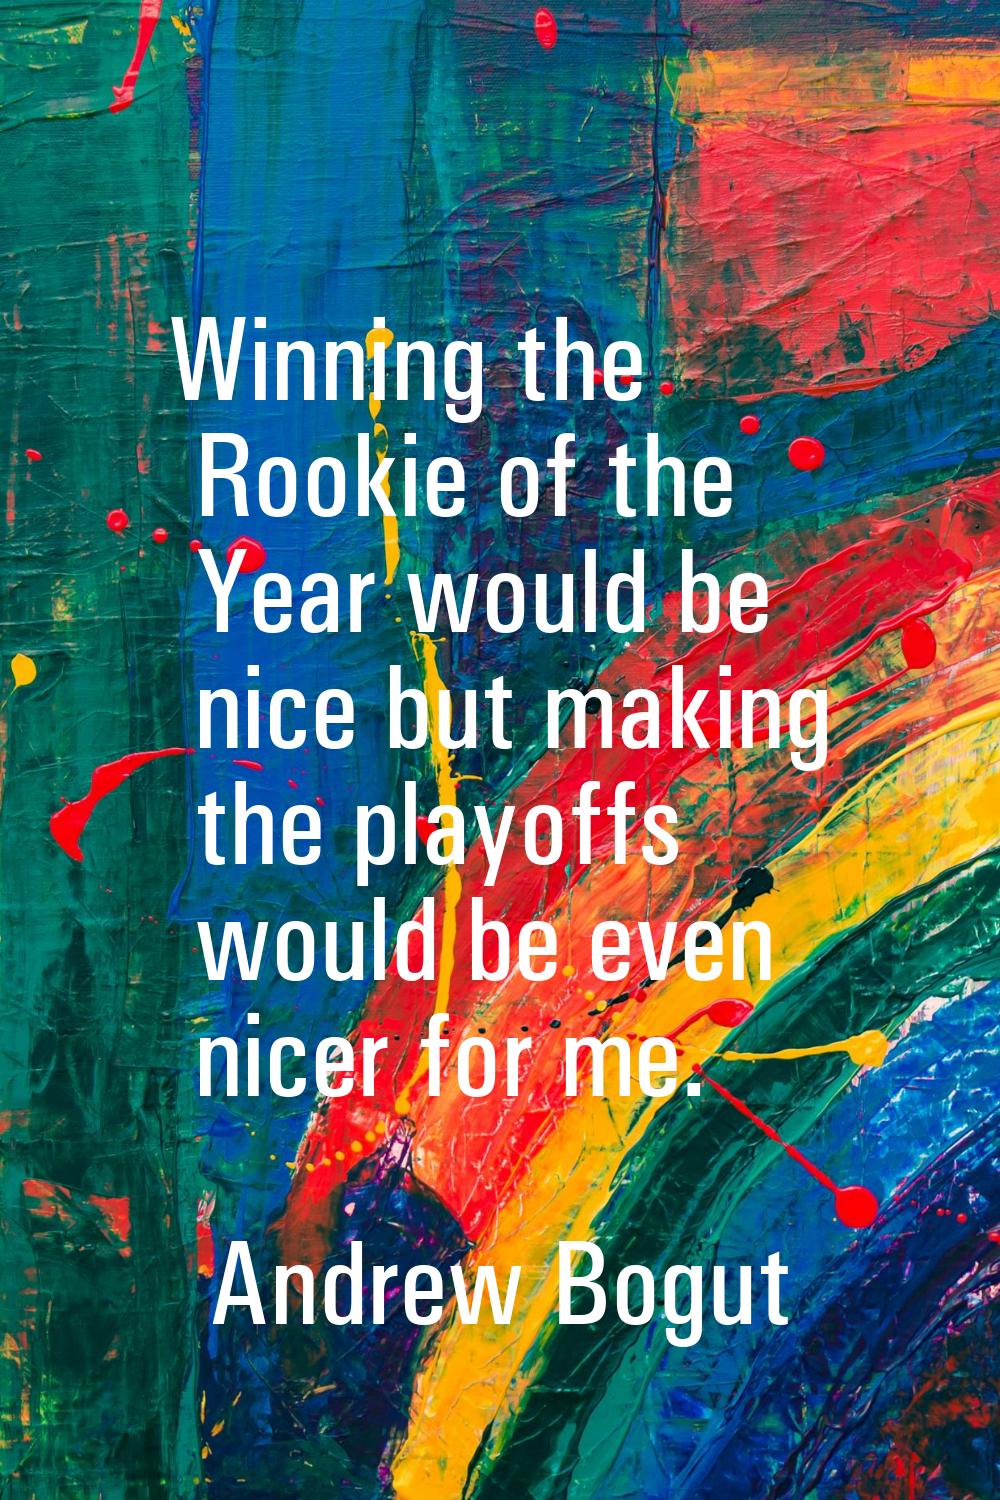 Winning the Rookie of the Year would be nice but making the playoffs would be even nicer for me.